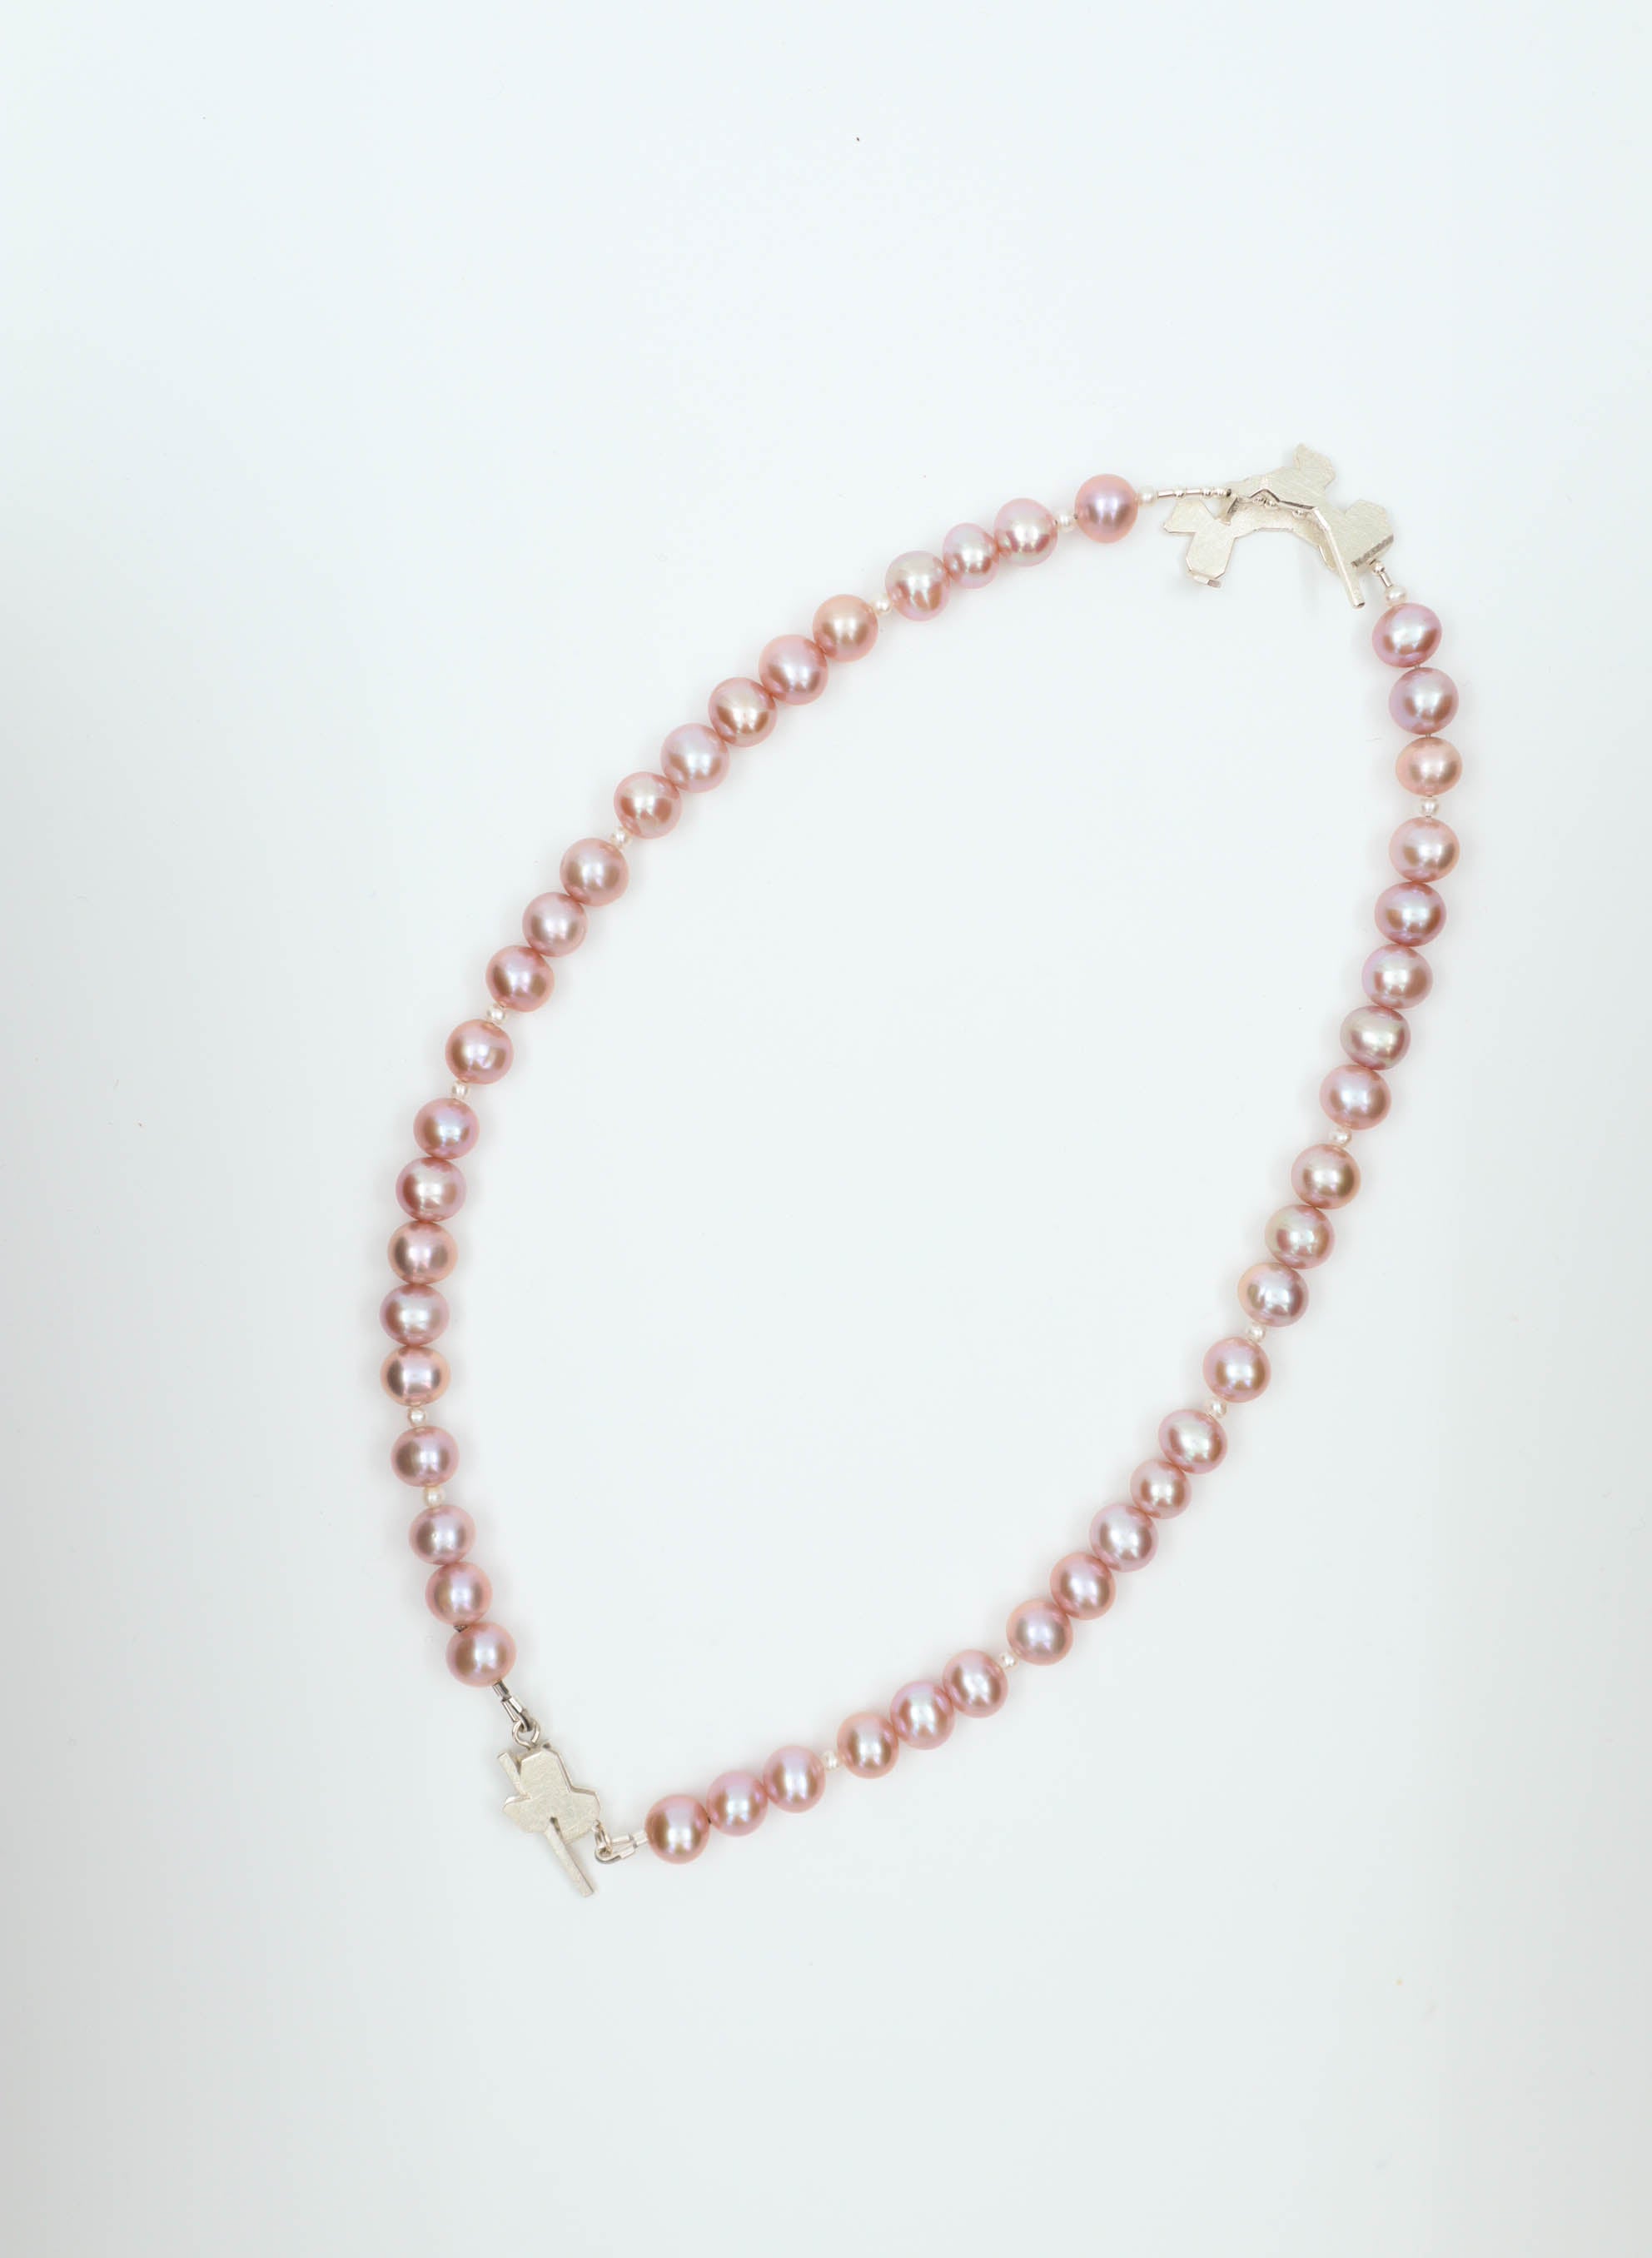 Dual Leaf Structure Necklace with Pearls